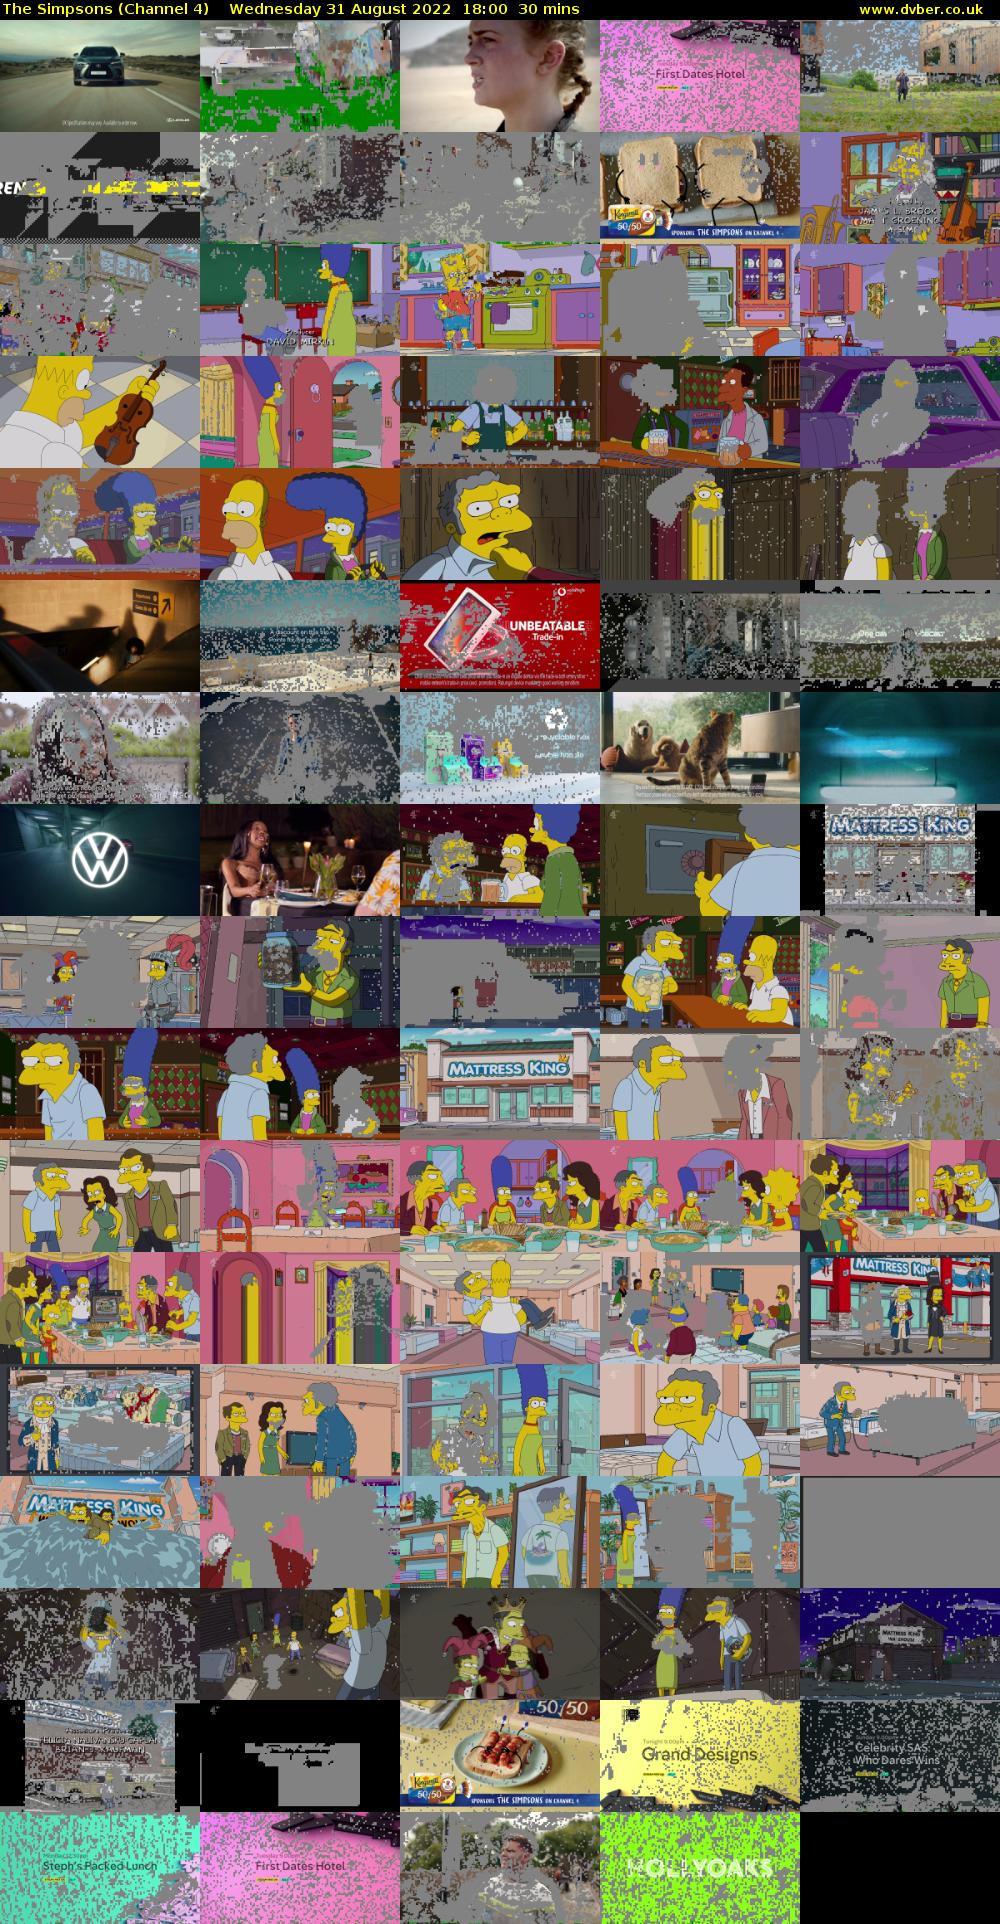 The Simpsons (Channel 4) Wednesday 31 August 2022 18:00 - 18:30